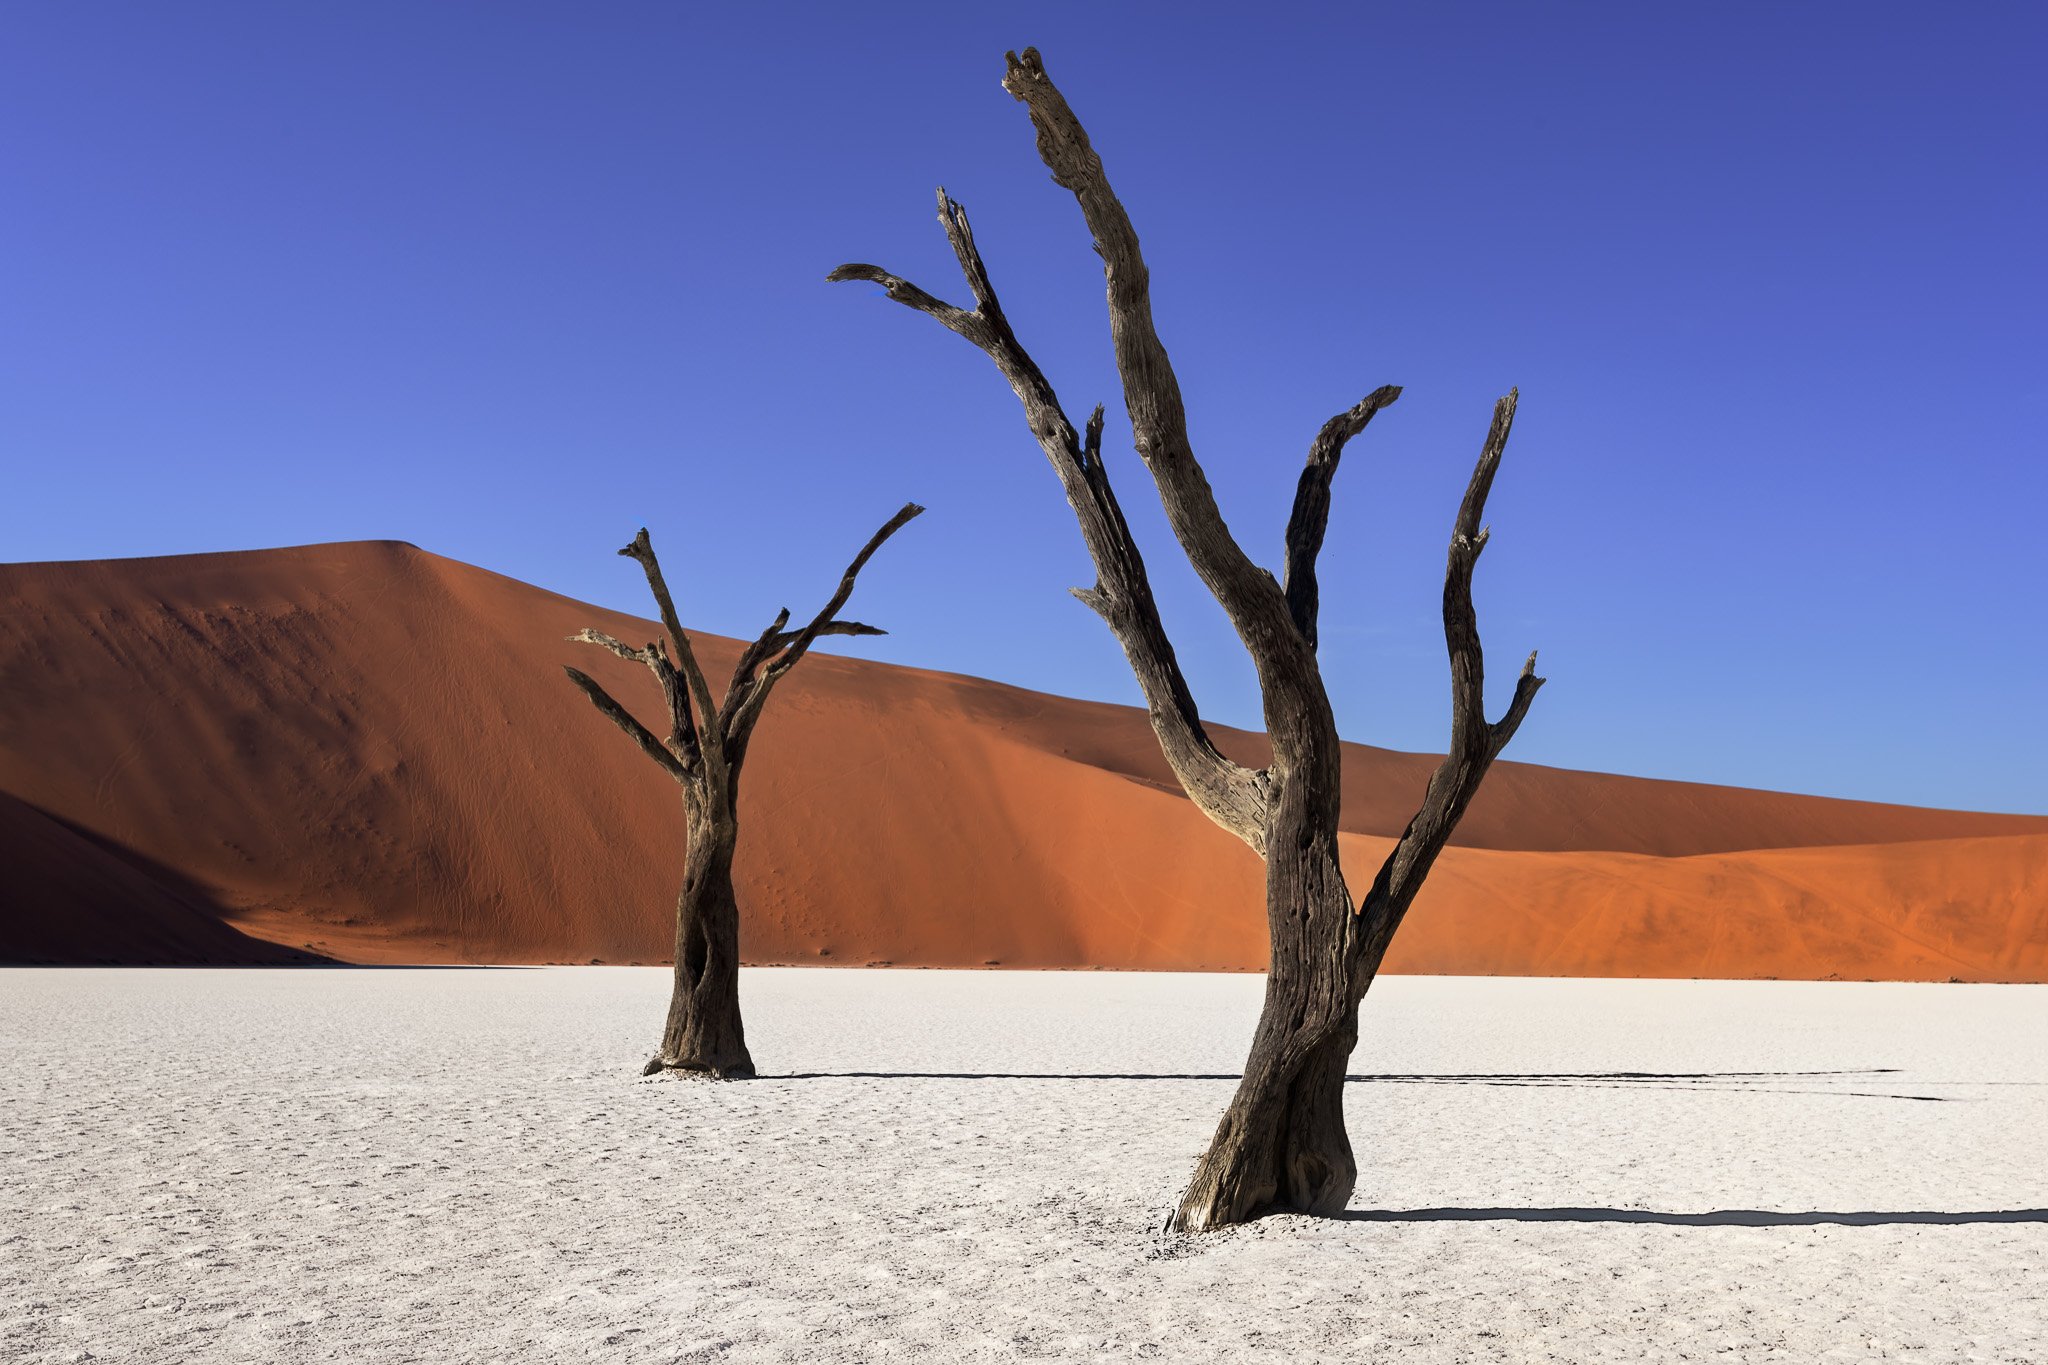 acacia, Africa, african, arid, beautiful, blue, branch, camelthorn, clay, day, daylight, dead, deadvlei, desert, drought, dry, dune, famous, forest, hot, lake, landmark, landscape, morning, namib, namibia, namibian, national, nature, naukluft, orange, out, Andrey Omelyanchuk